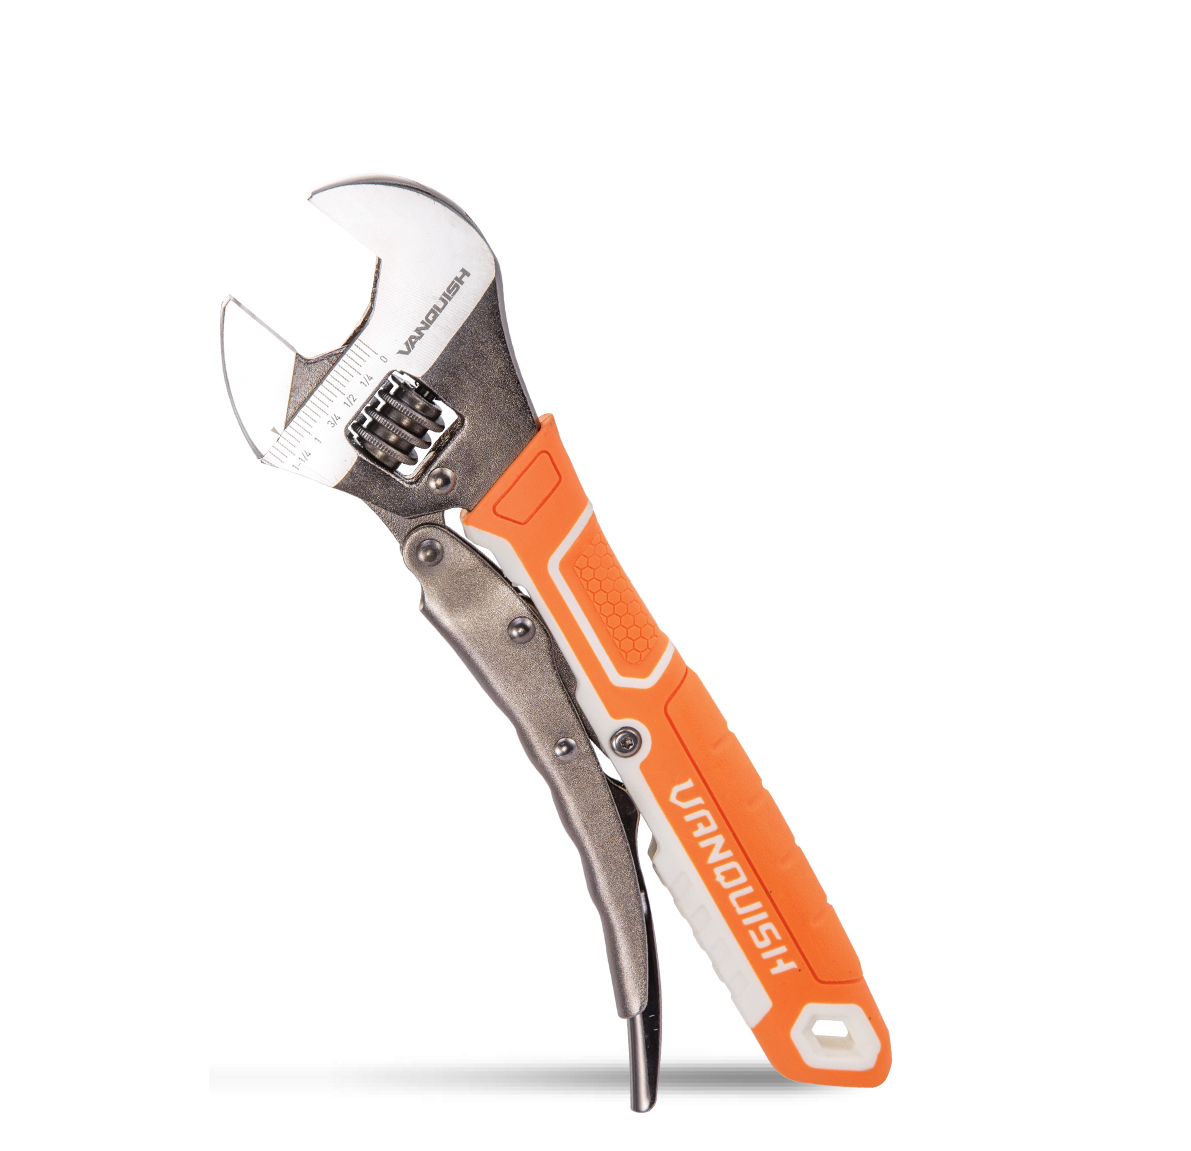 EXTREME GRIP ADJUSTABLE WRENCH